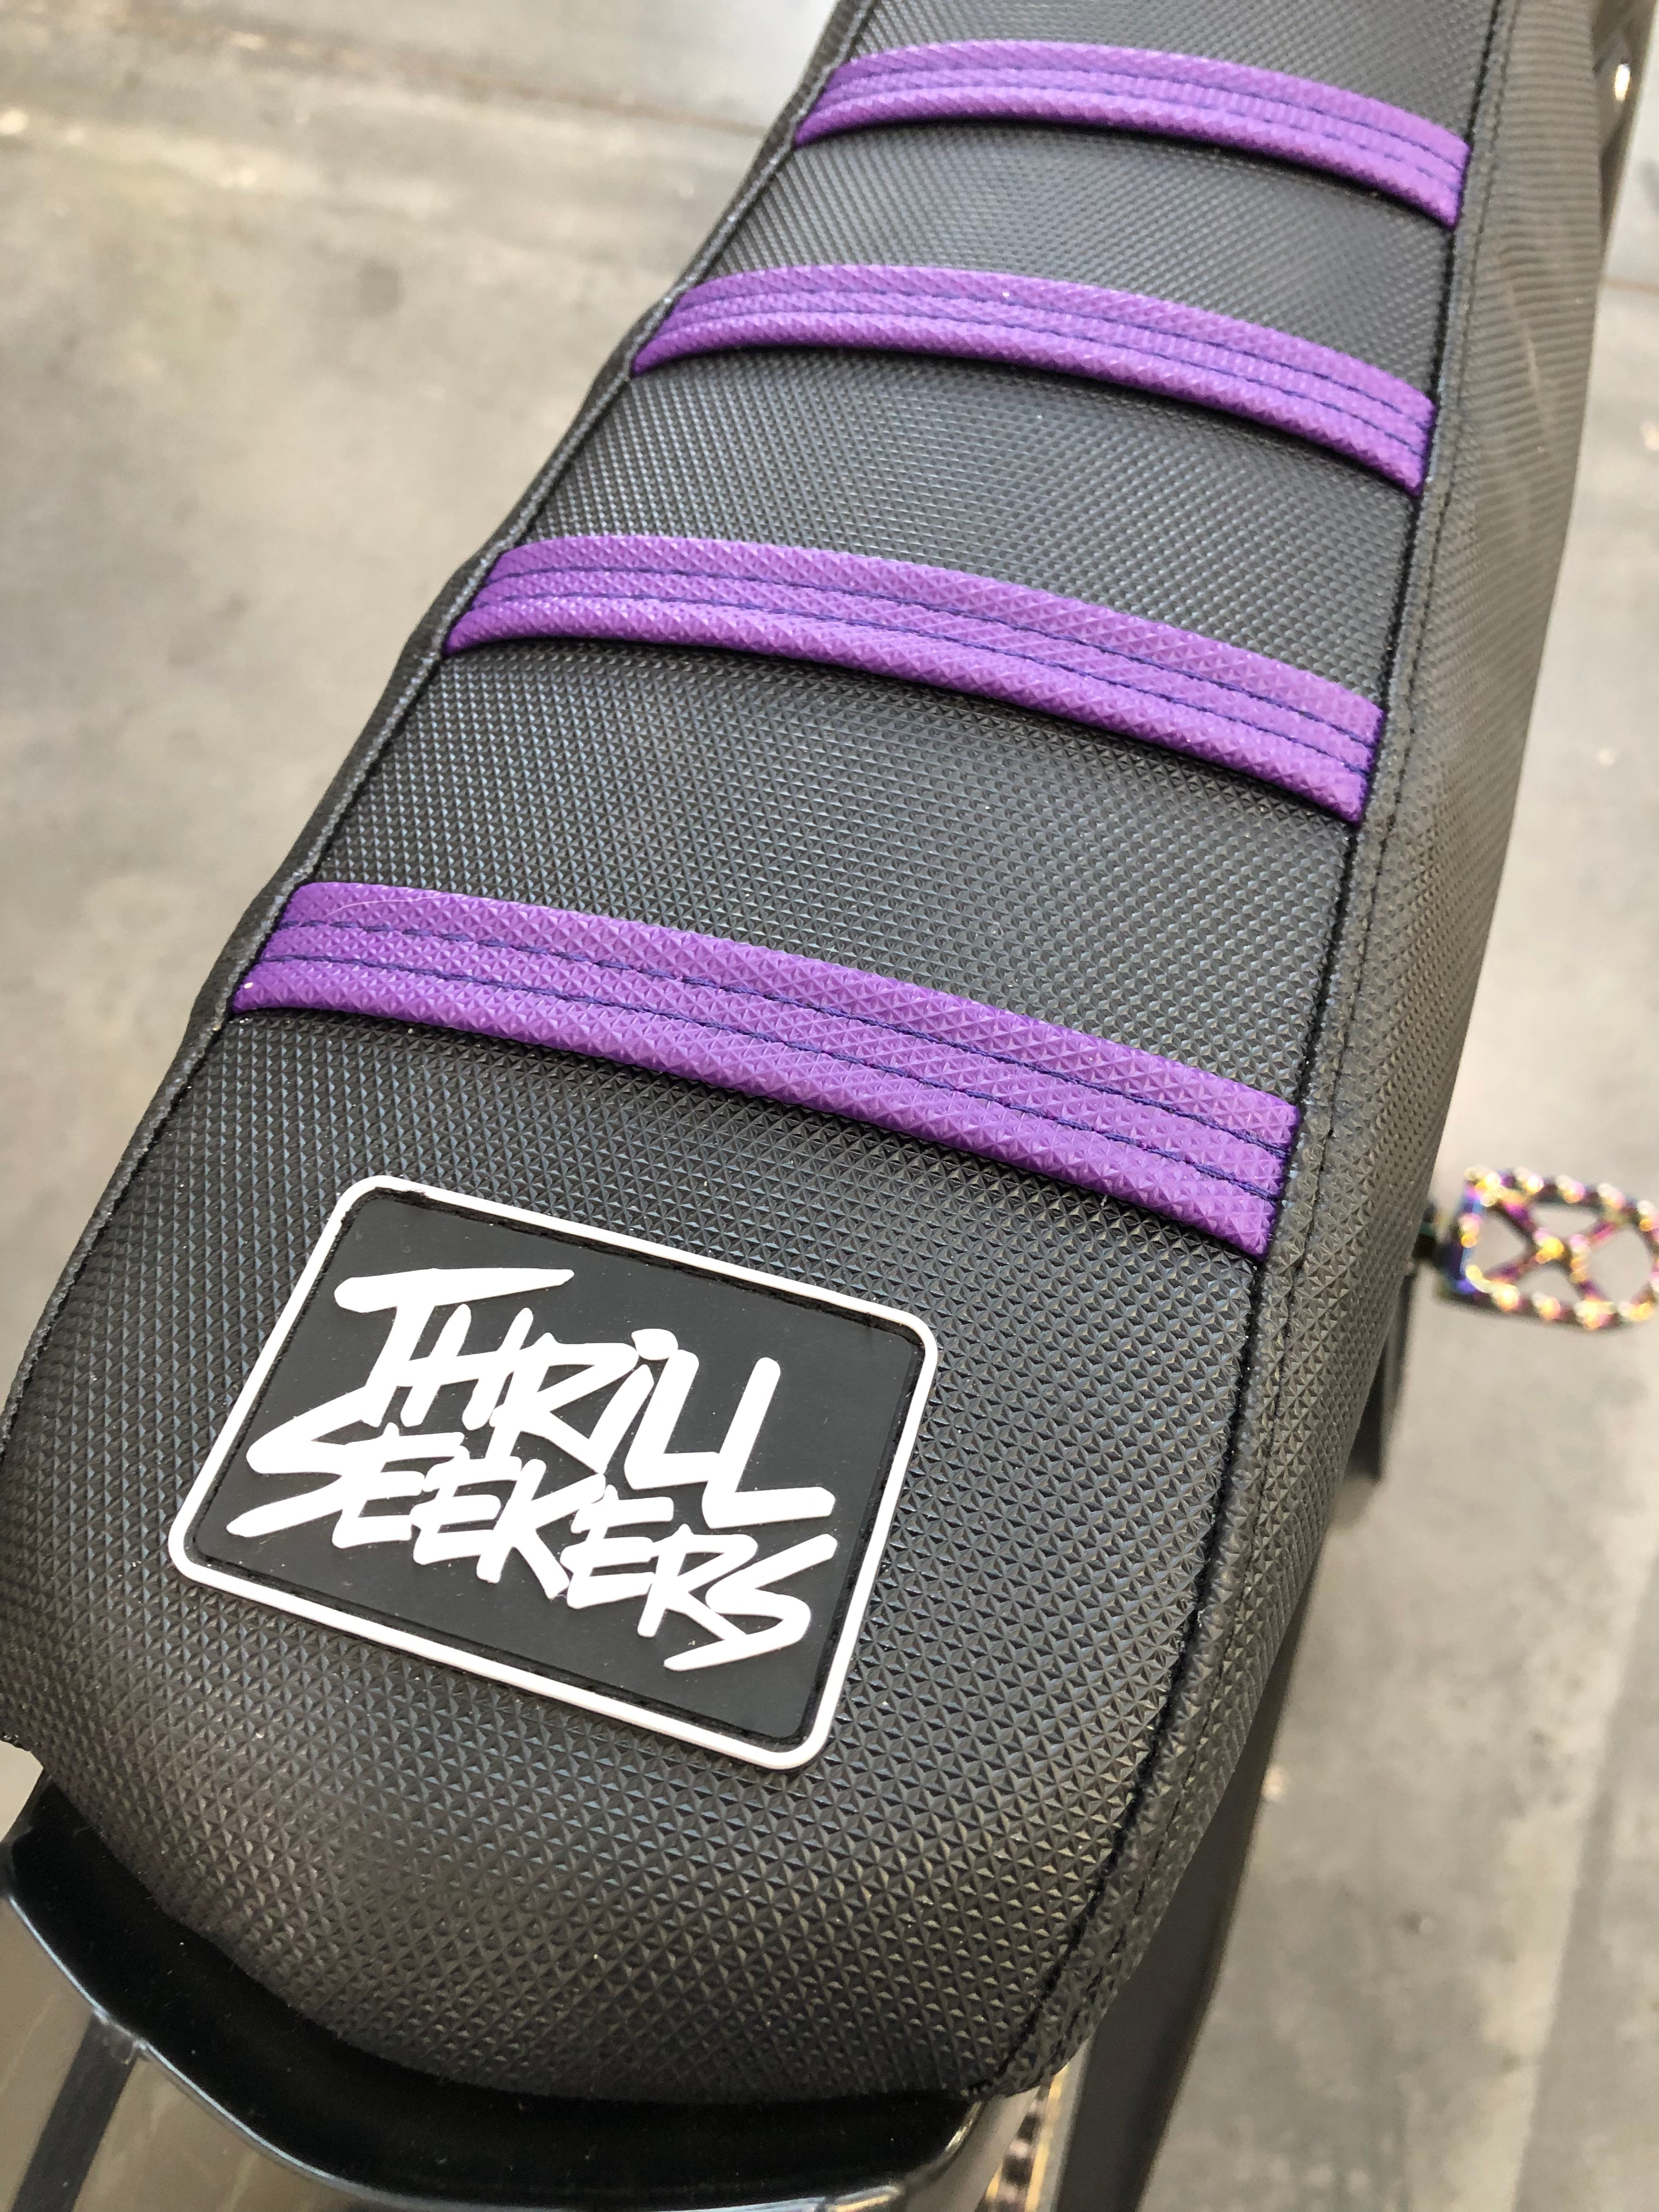 Thrill Seekers Seat Cover for Surron, Segway, and Talaria